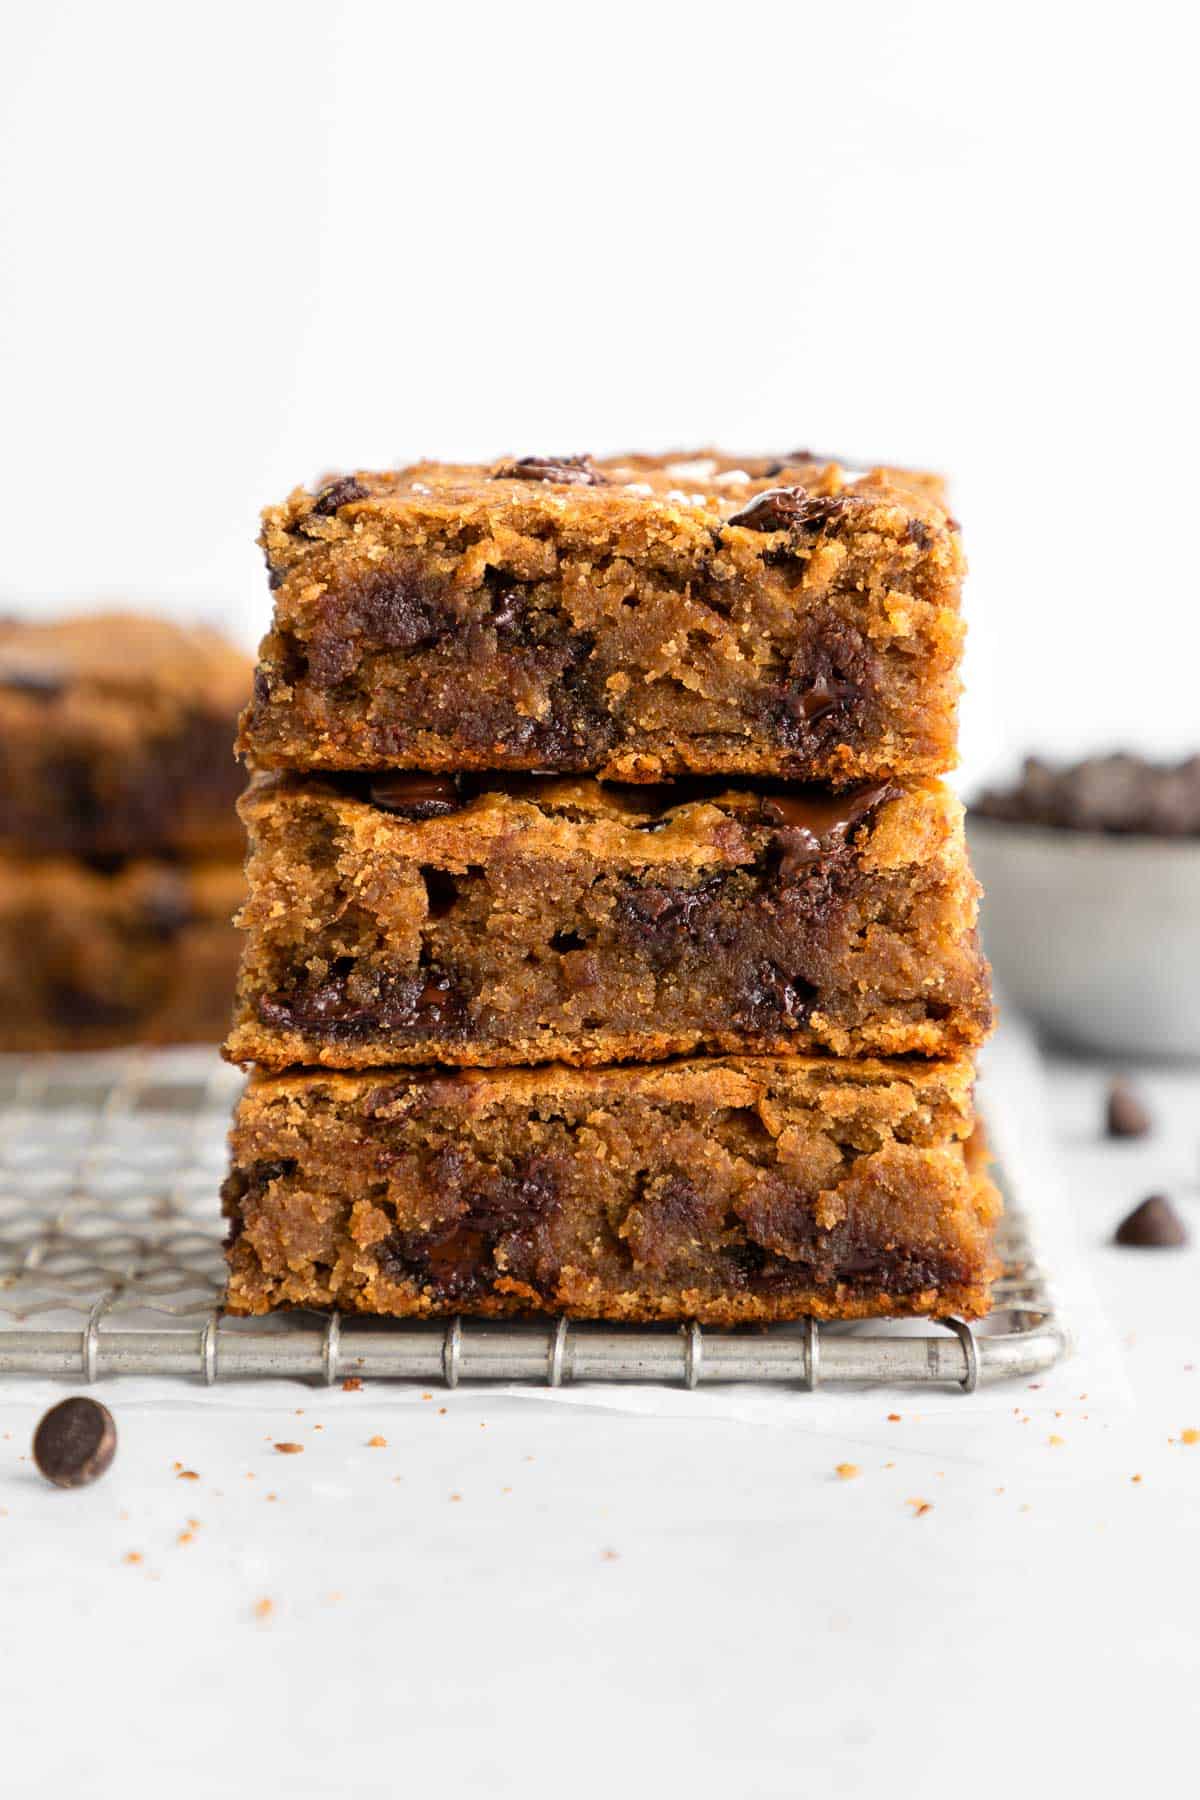 a stack of three chocolate chip banana blondies bars on a wire rack